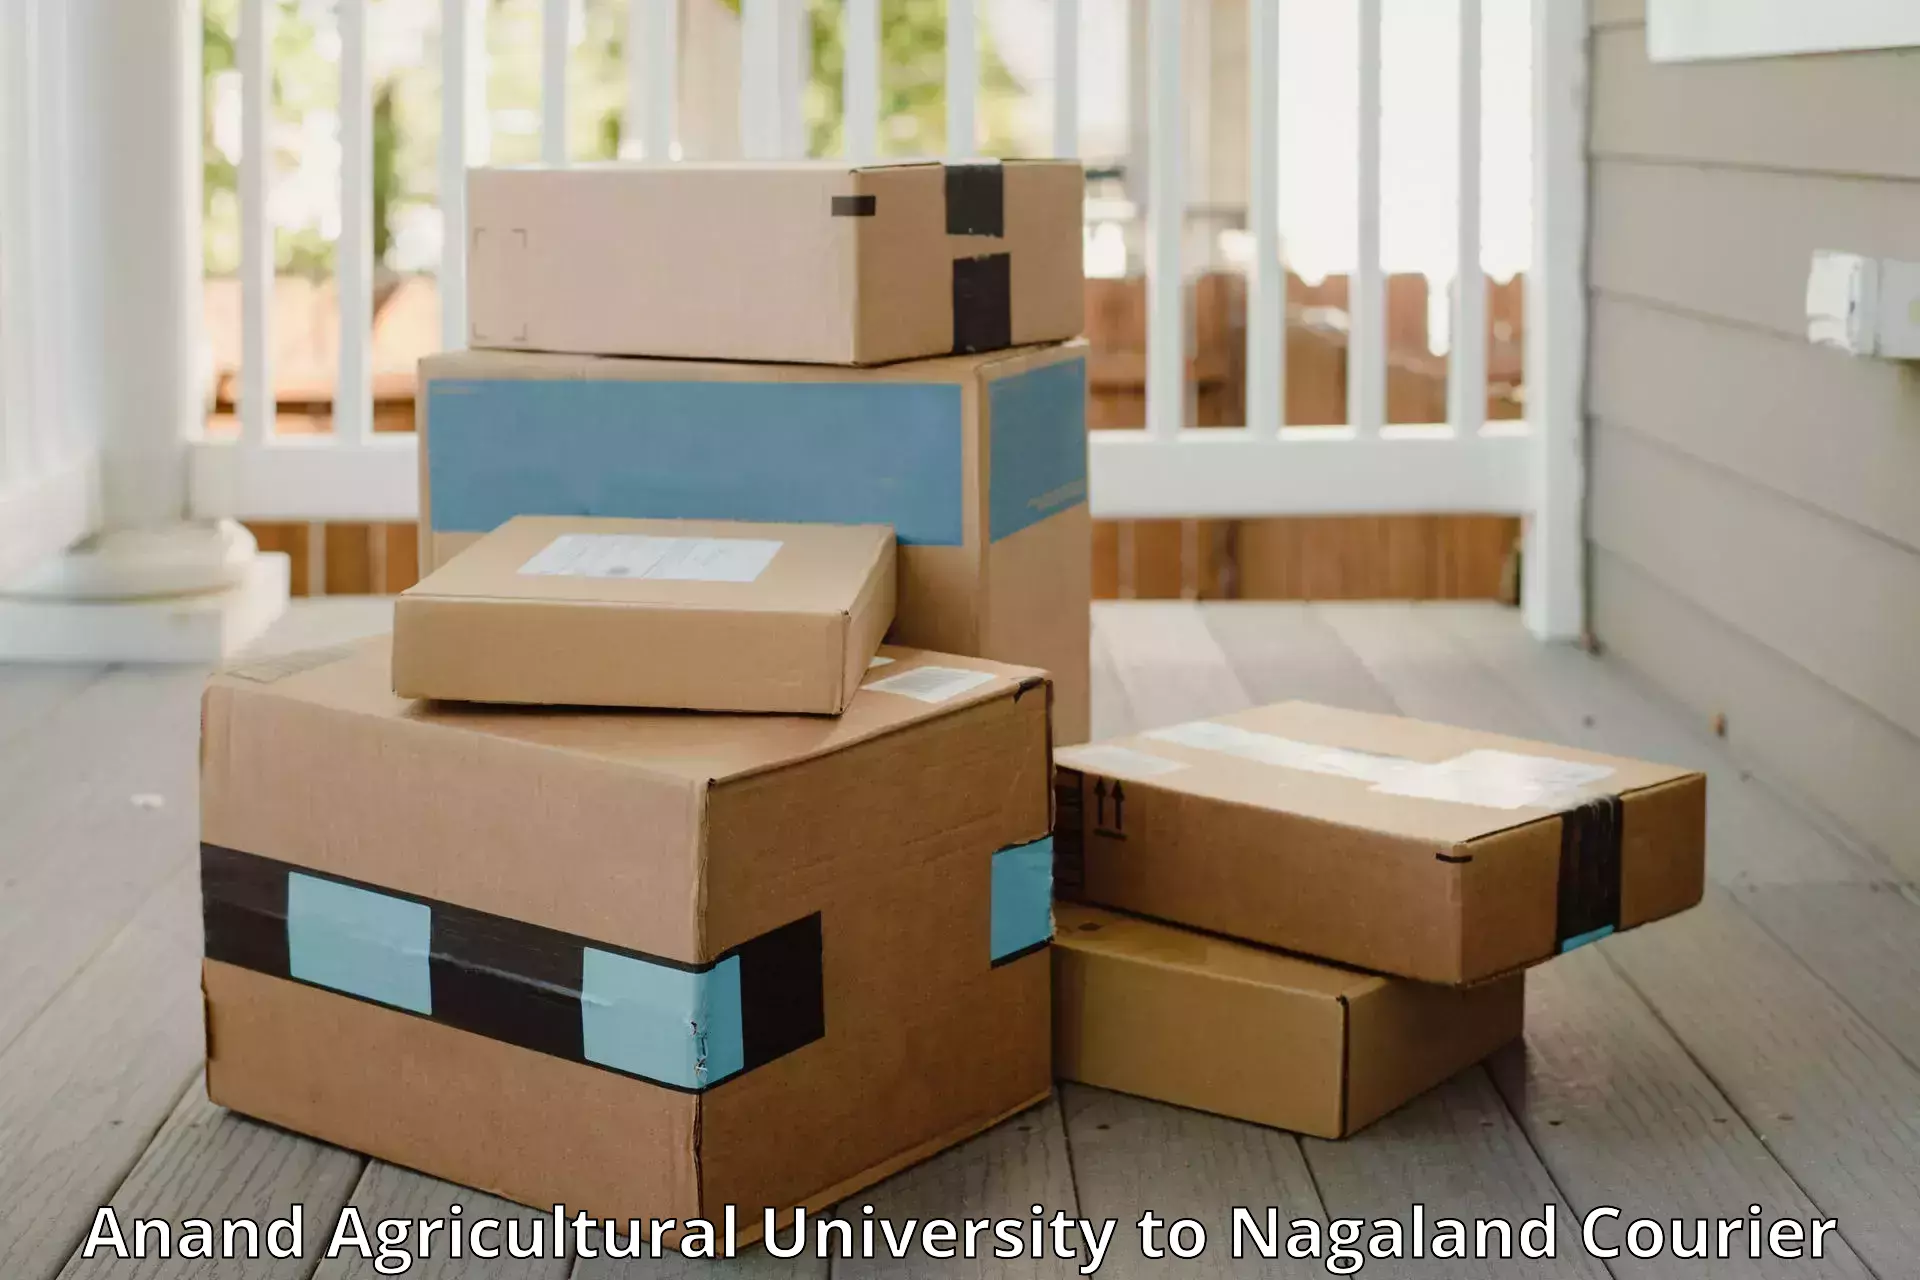 Baggage shipping schedule Anand Agricultural University to Nagaland